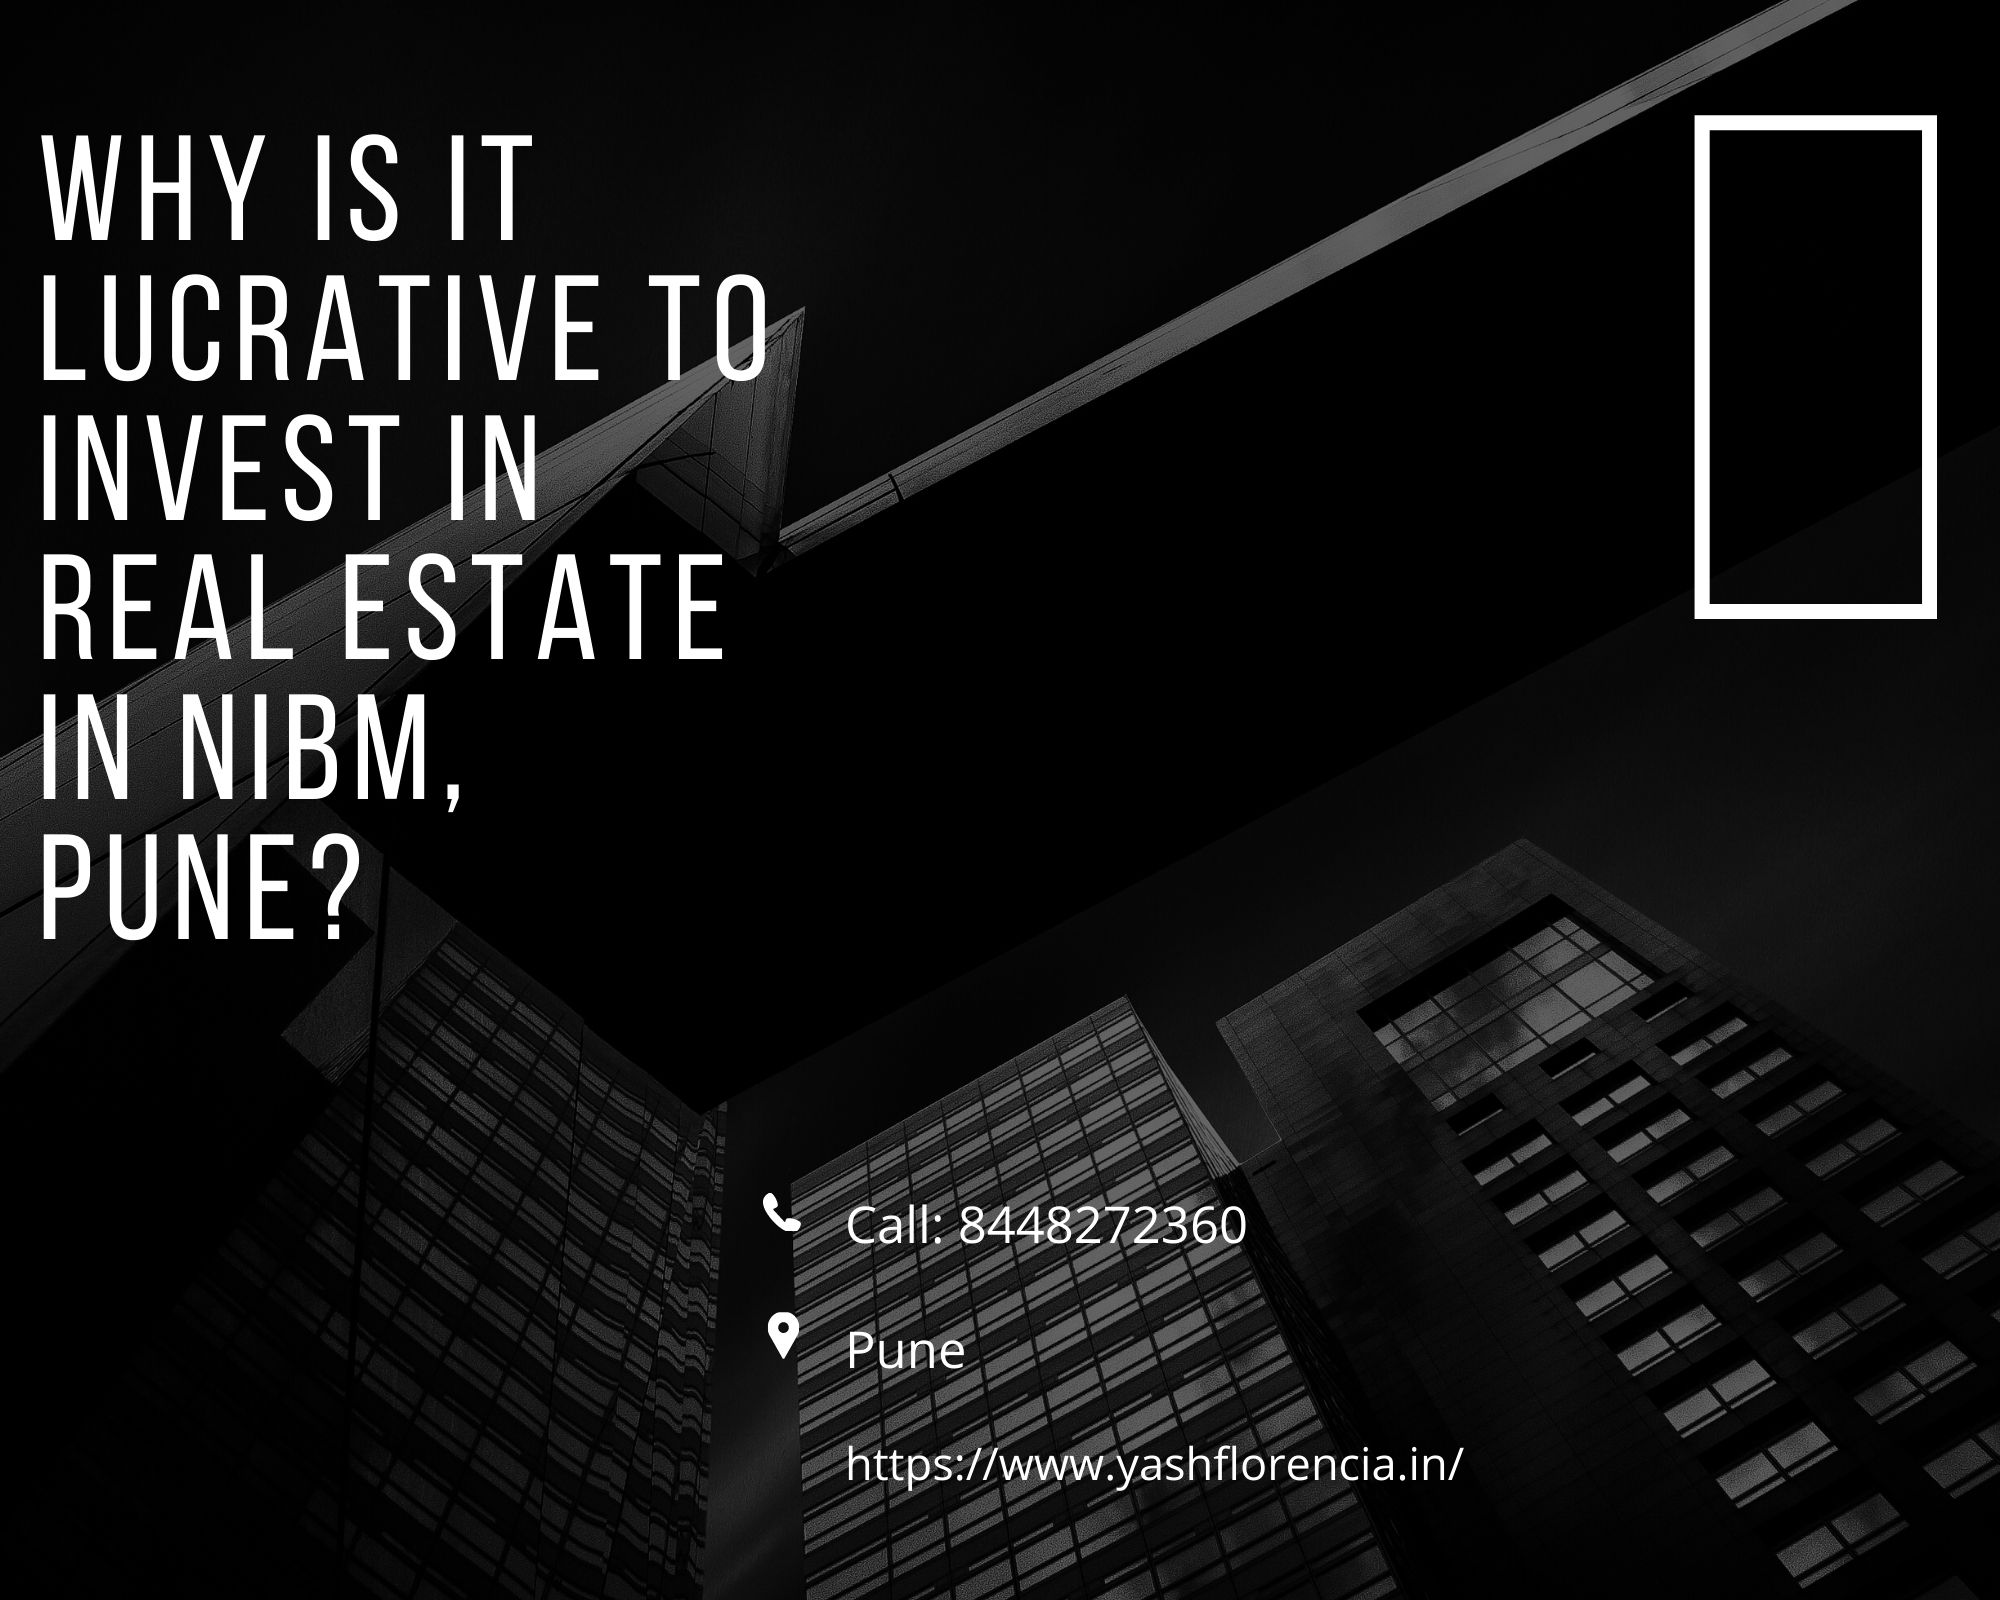 Why is it lucrative to invest in real estate in NIBM, Pune?